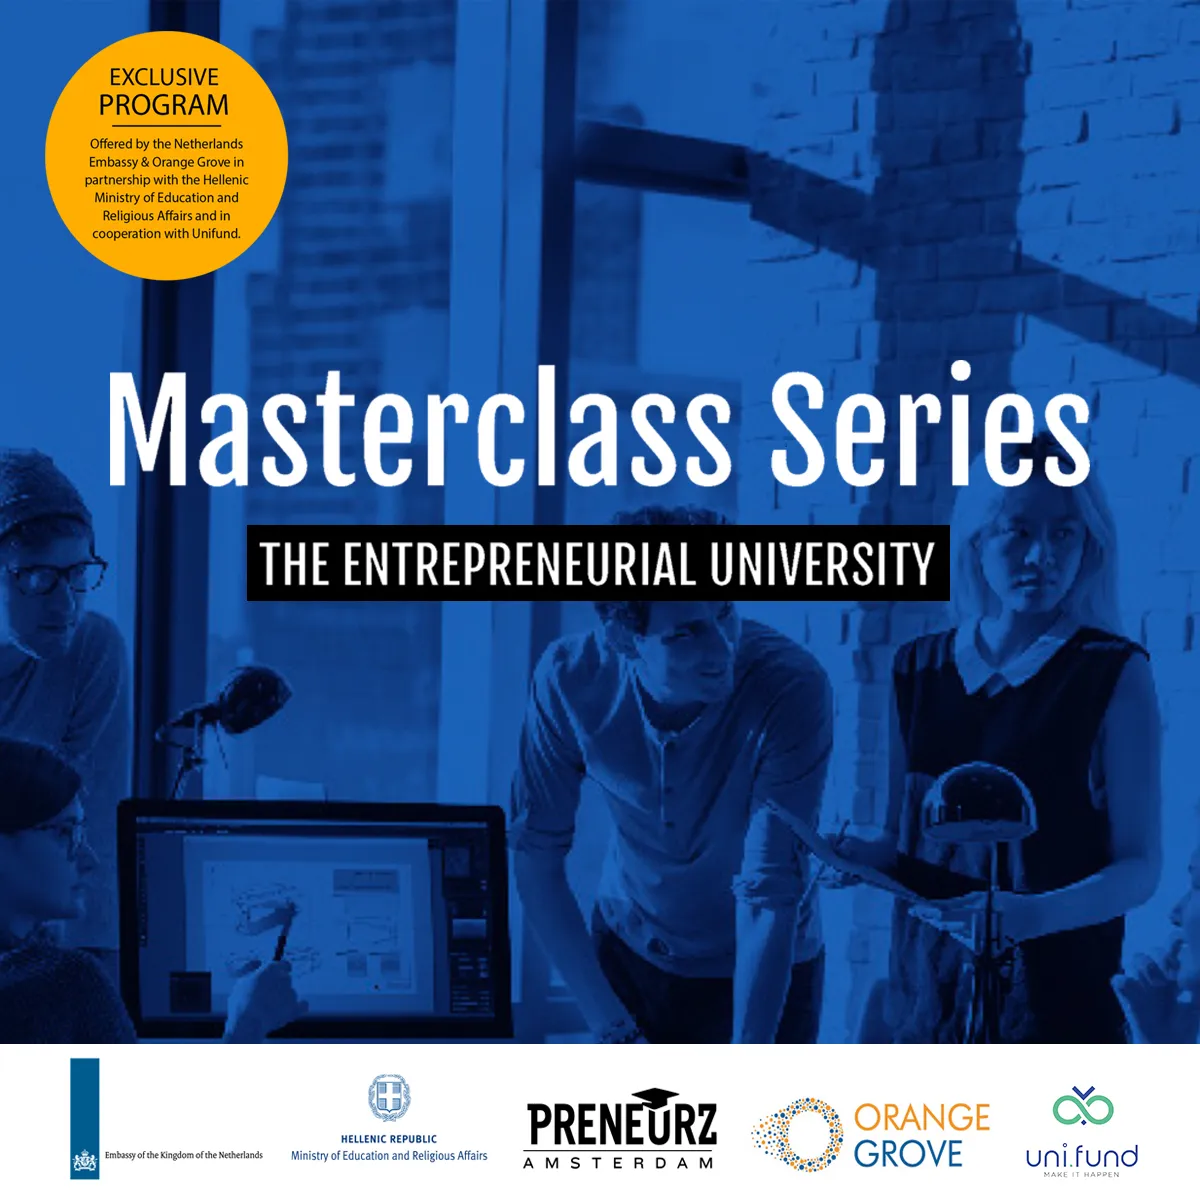 Launching the “Entrepreneurial University” programme— A new paradigm for universities